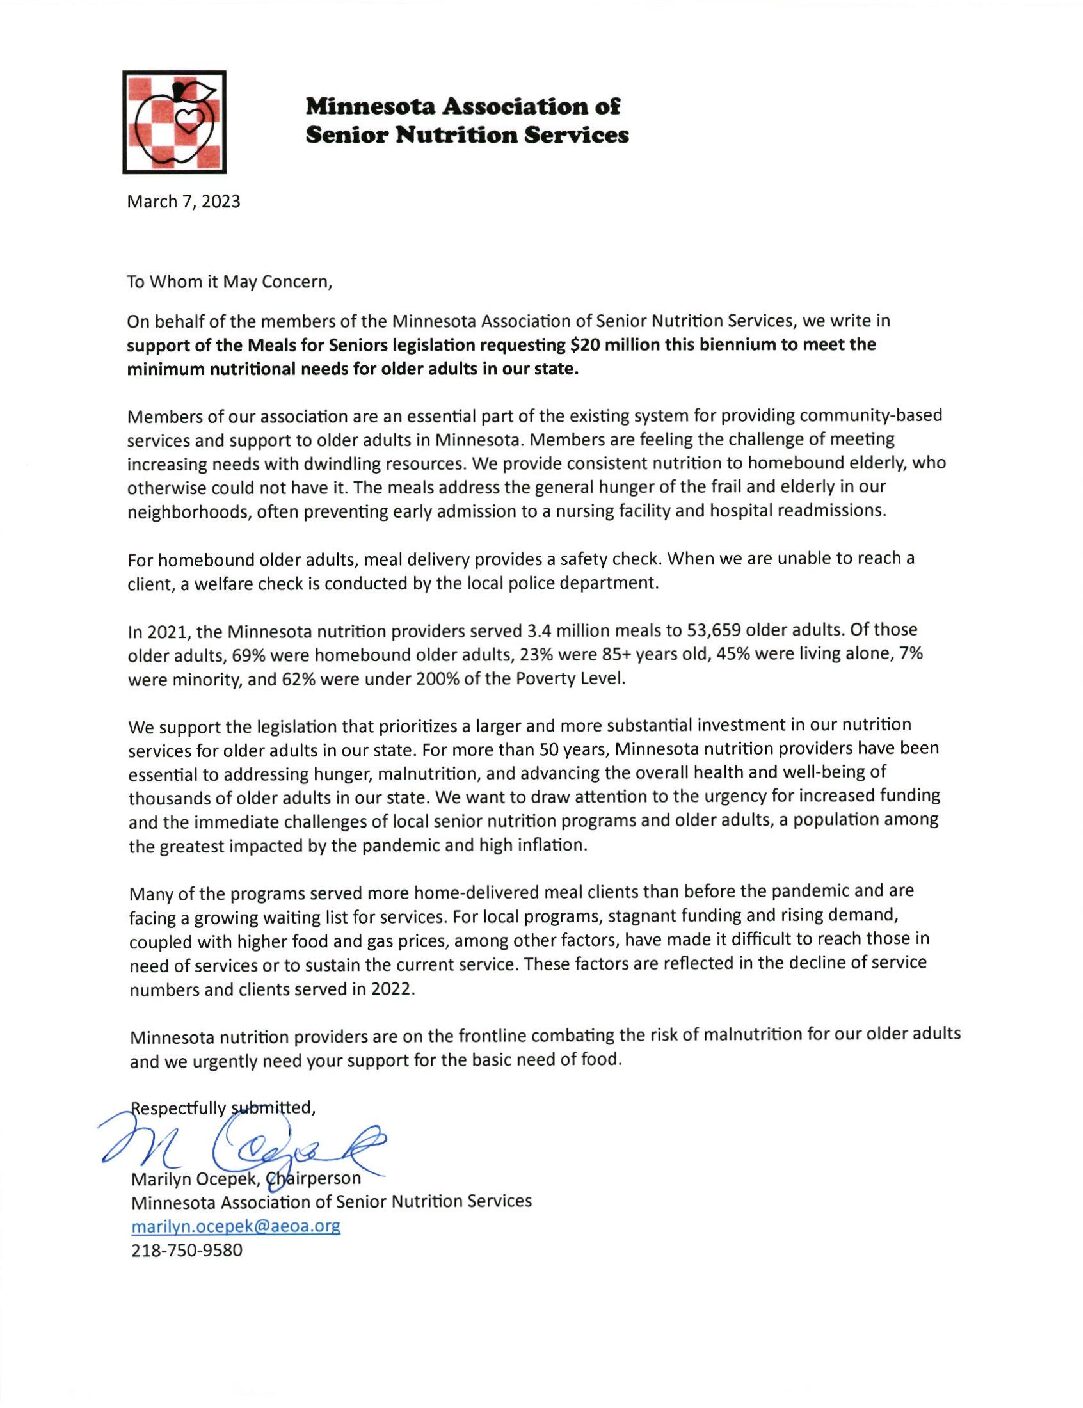 Letter of support from Minnesota Association of Senior Nutrition Services